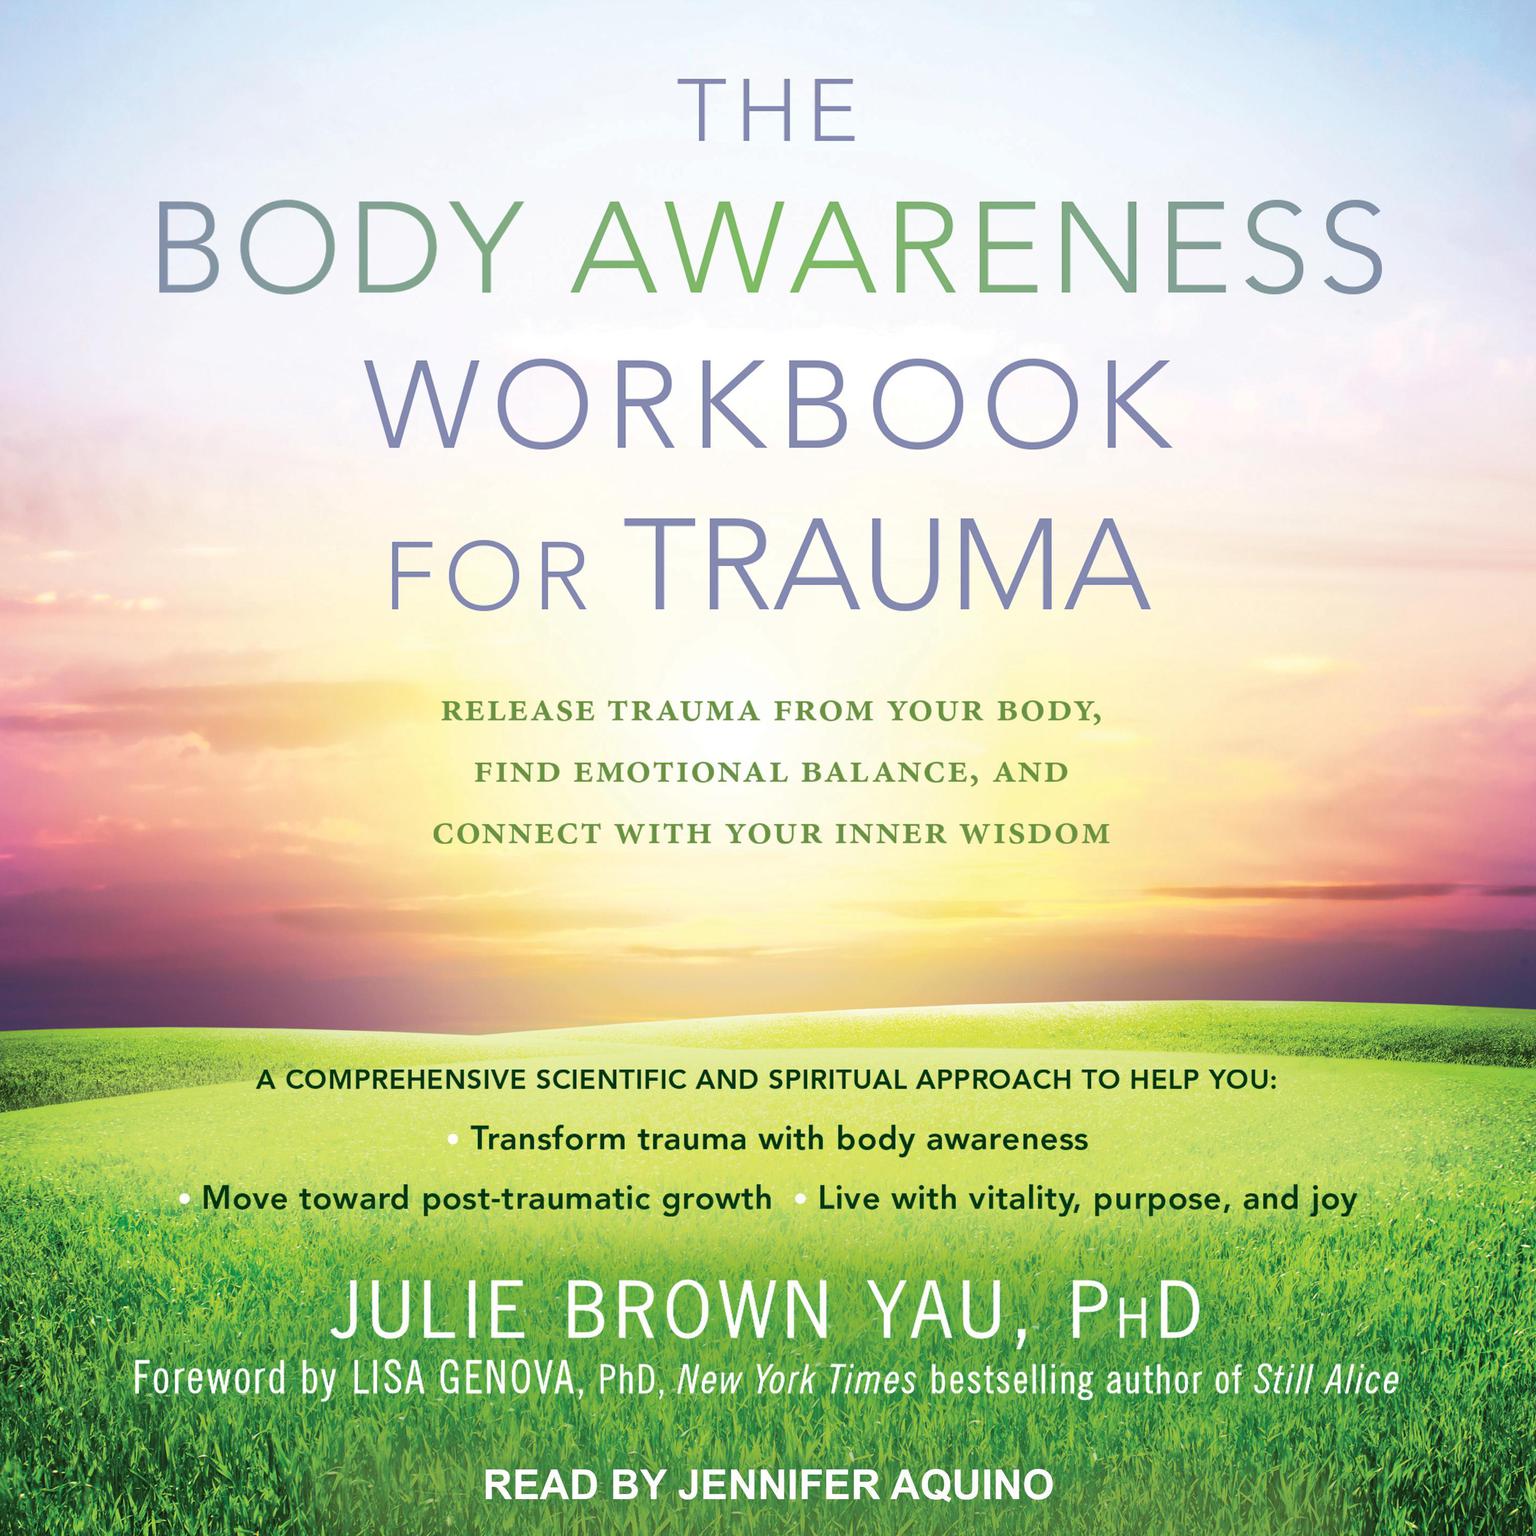 The Body Awareness Workbook for Trauma: Release Trauma from Your Body, Find Emotional Balance, and Connect with Your Inner Wisdom Audiobook, by Julie Brown Yau